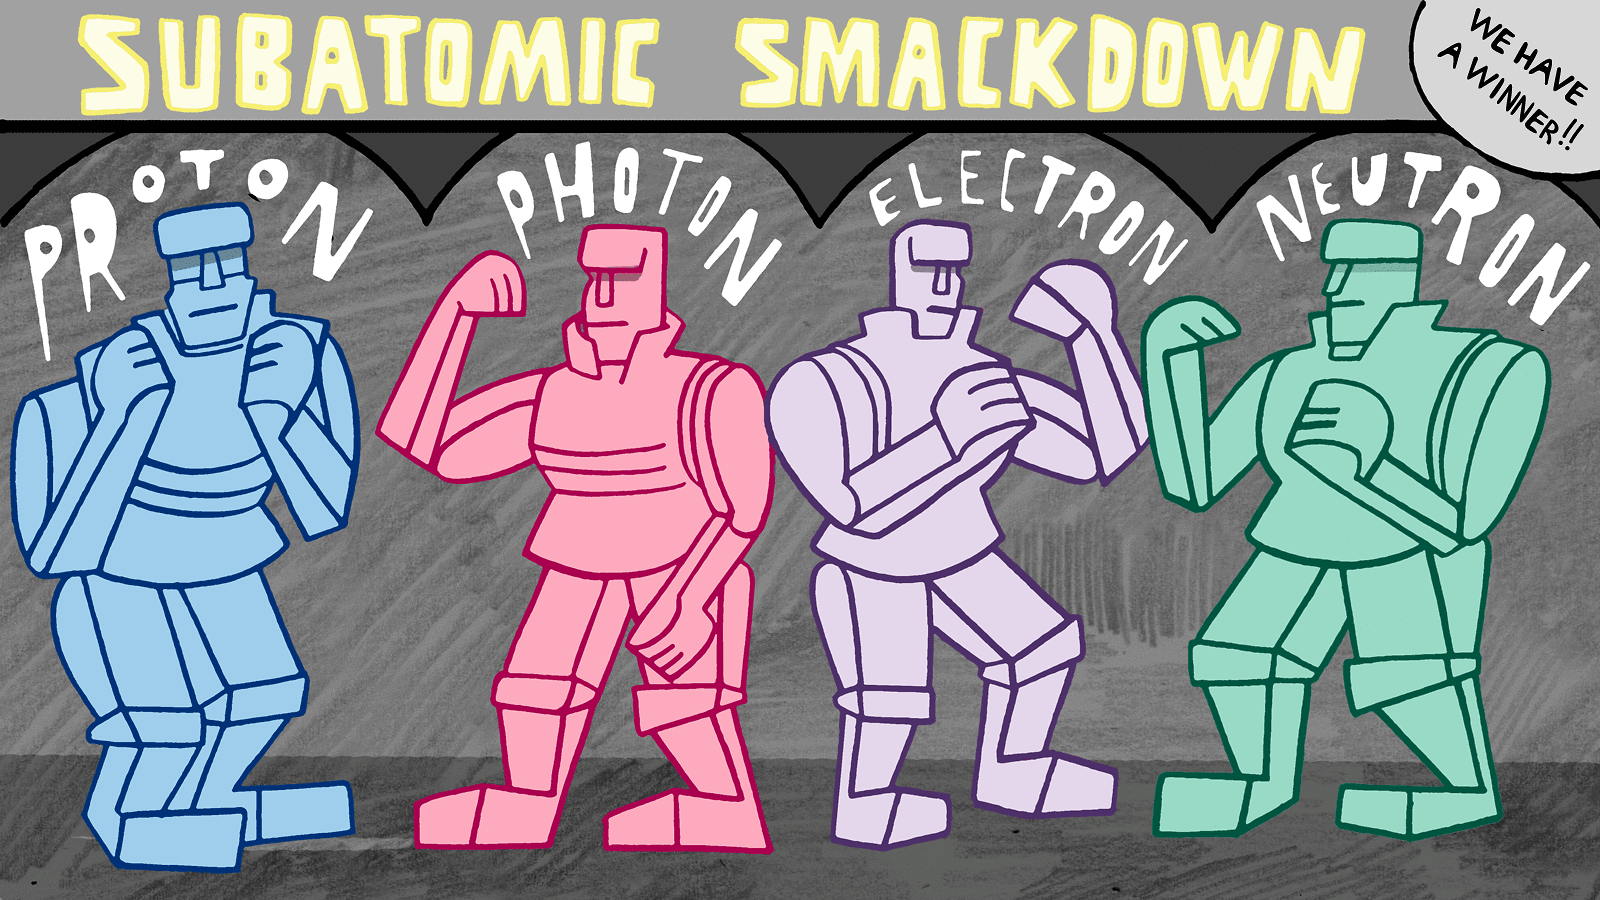 Illustration of four Rock 'Em Sock 'Em robots representing the four particles in the Sub Smackdown (blue, red, purple, green)